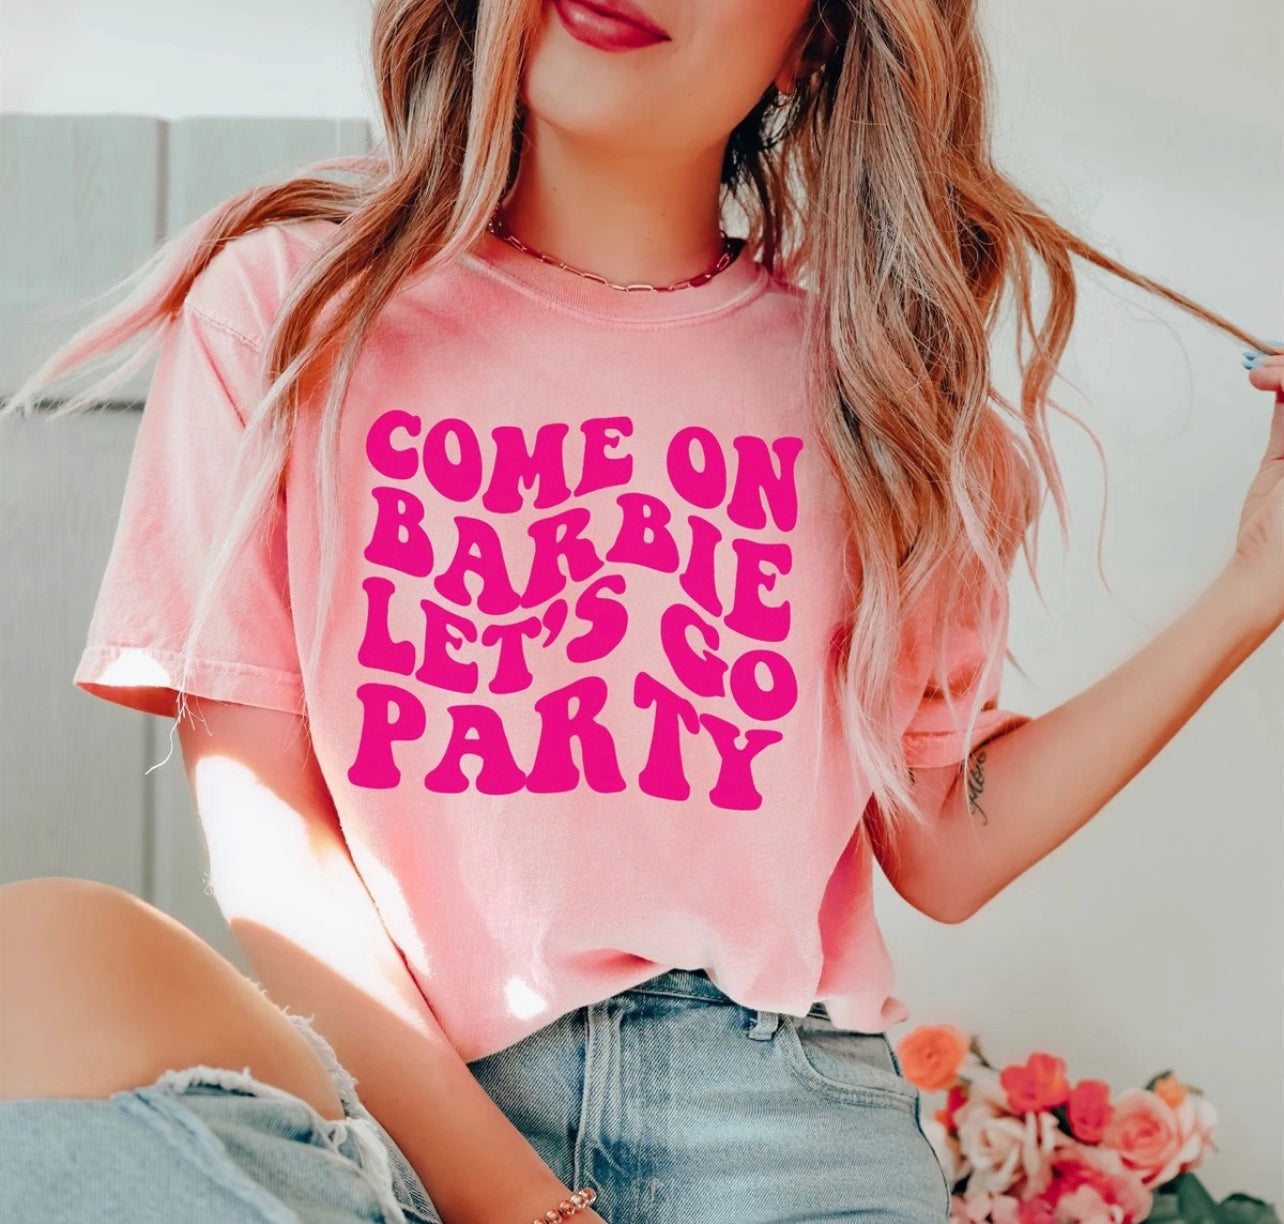 Come on Barbie lets go party shirt| Barbie tee| Barbie movie| Barbie shirt| Barbie shirt| Barbie tee| Barbie Girl shirt